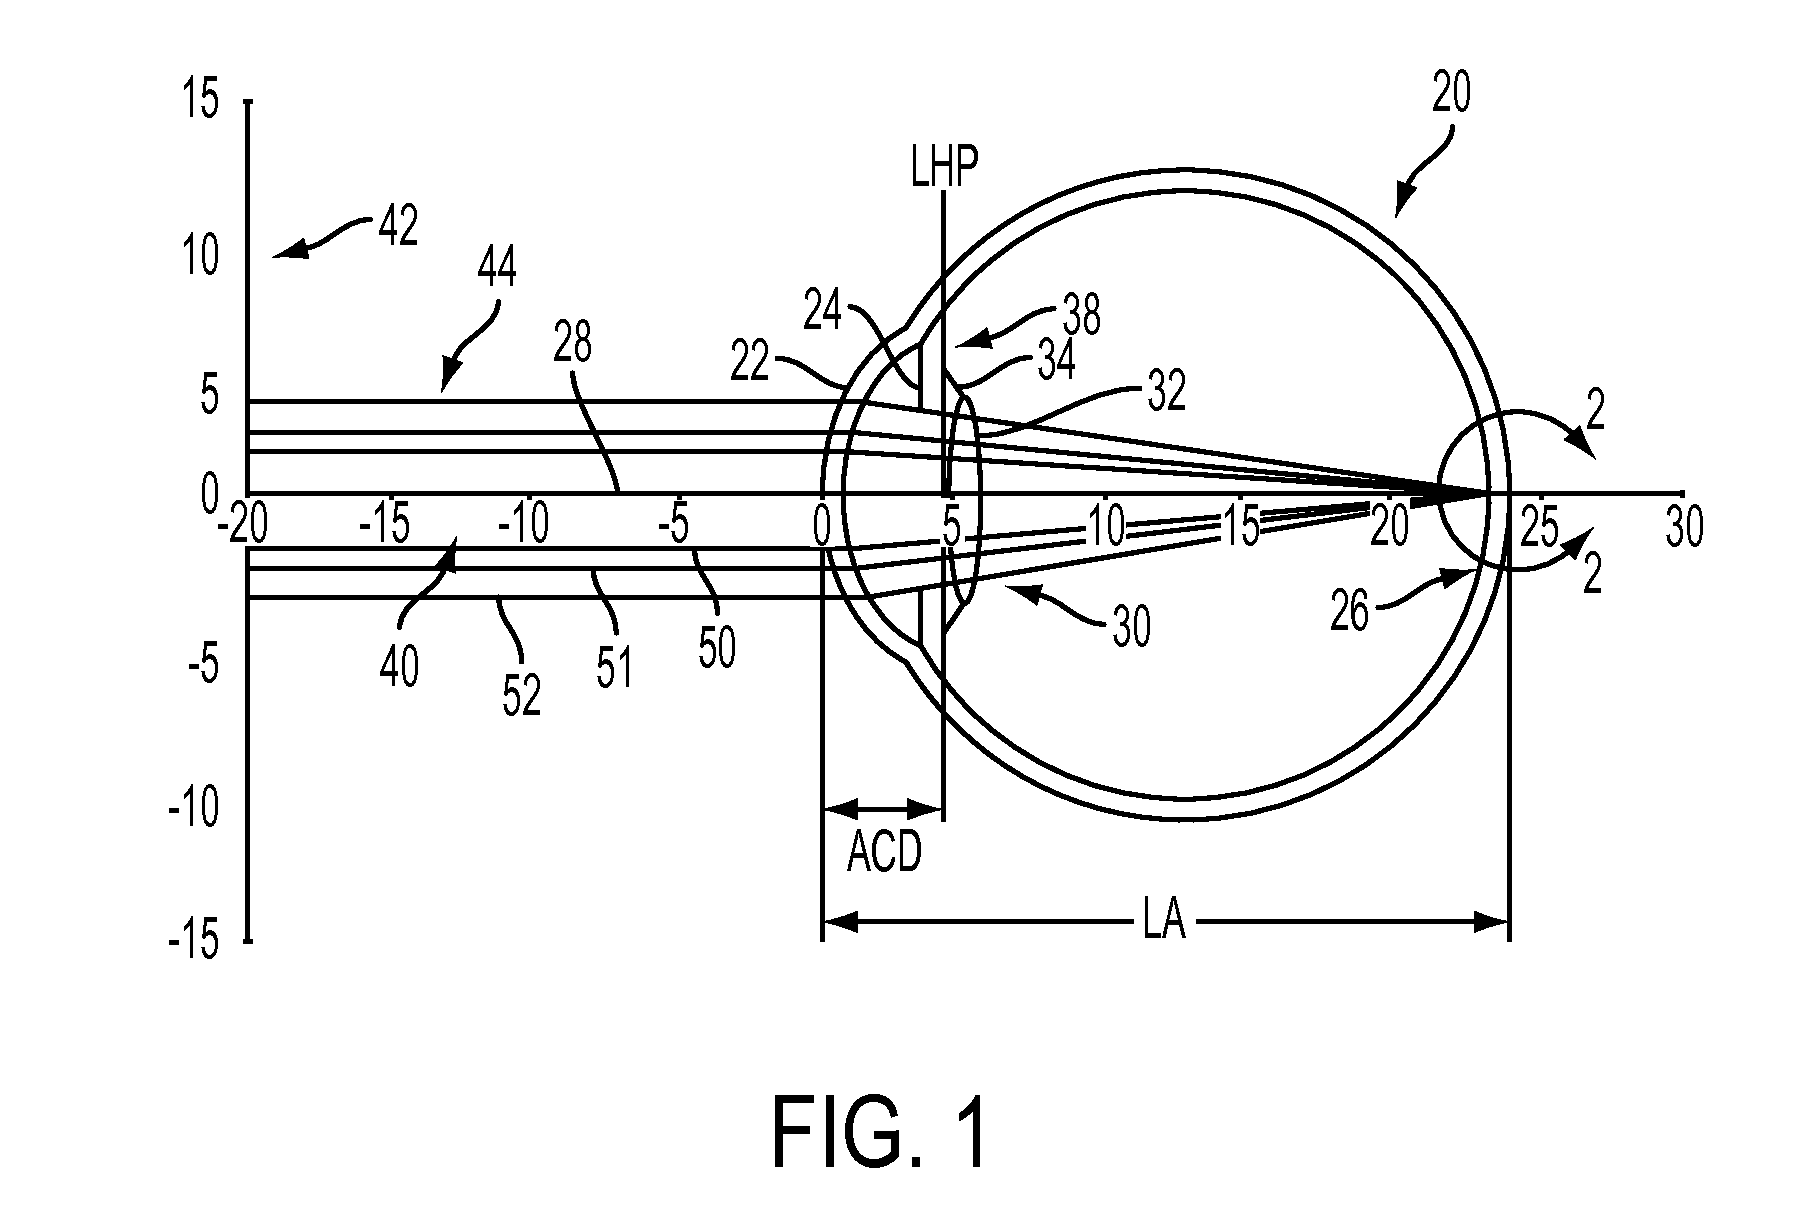 Apparatus, system and method to account for spherical aberration at the iris plane in the design of an intraocular lens